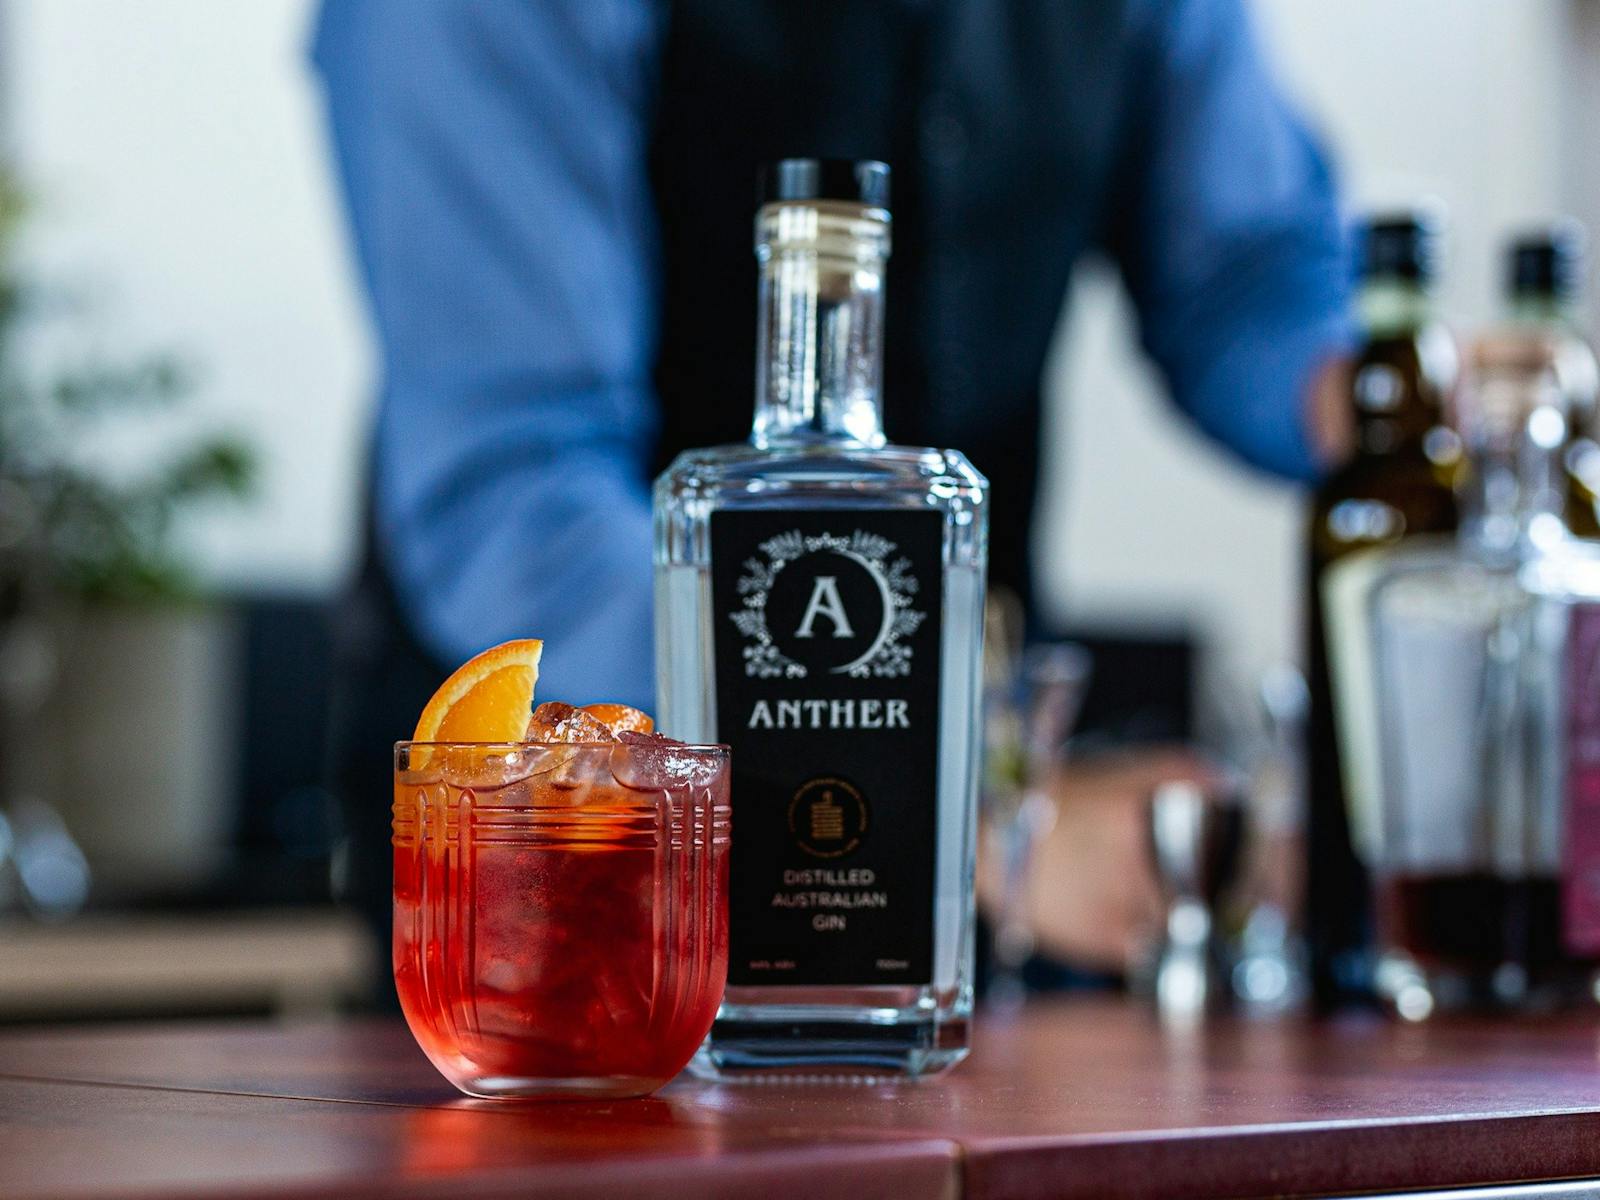 Anther Gin Negroni on the Anther Distillery Bar - enjoy champion awarded Australian spirits.